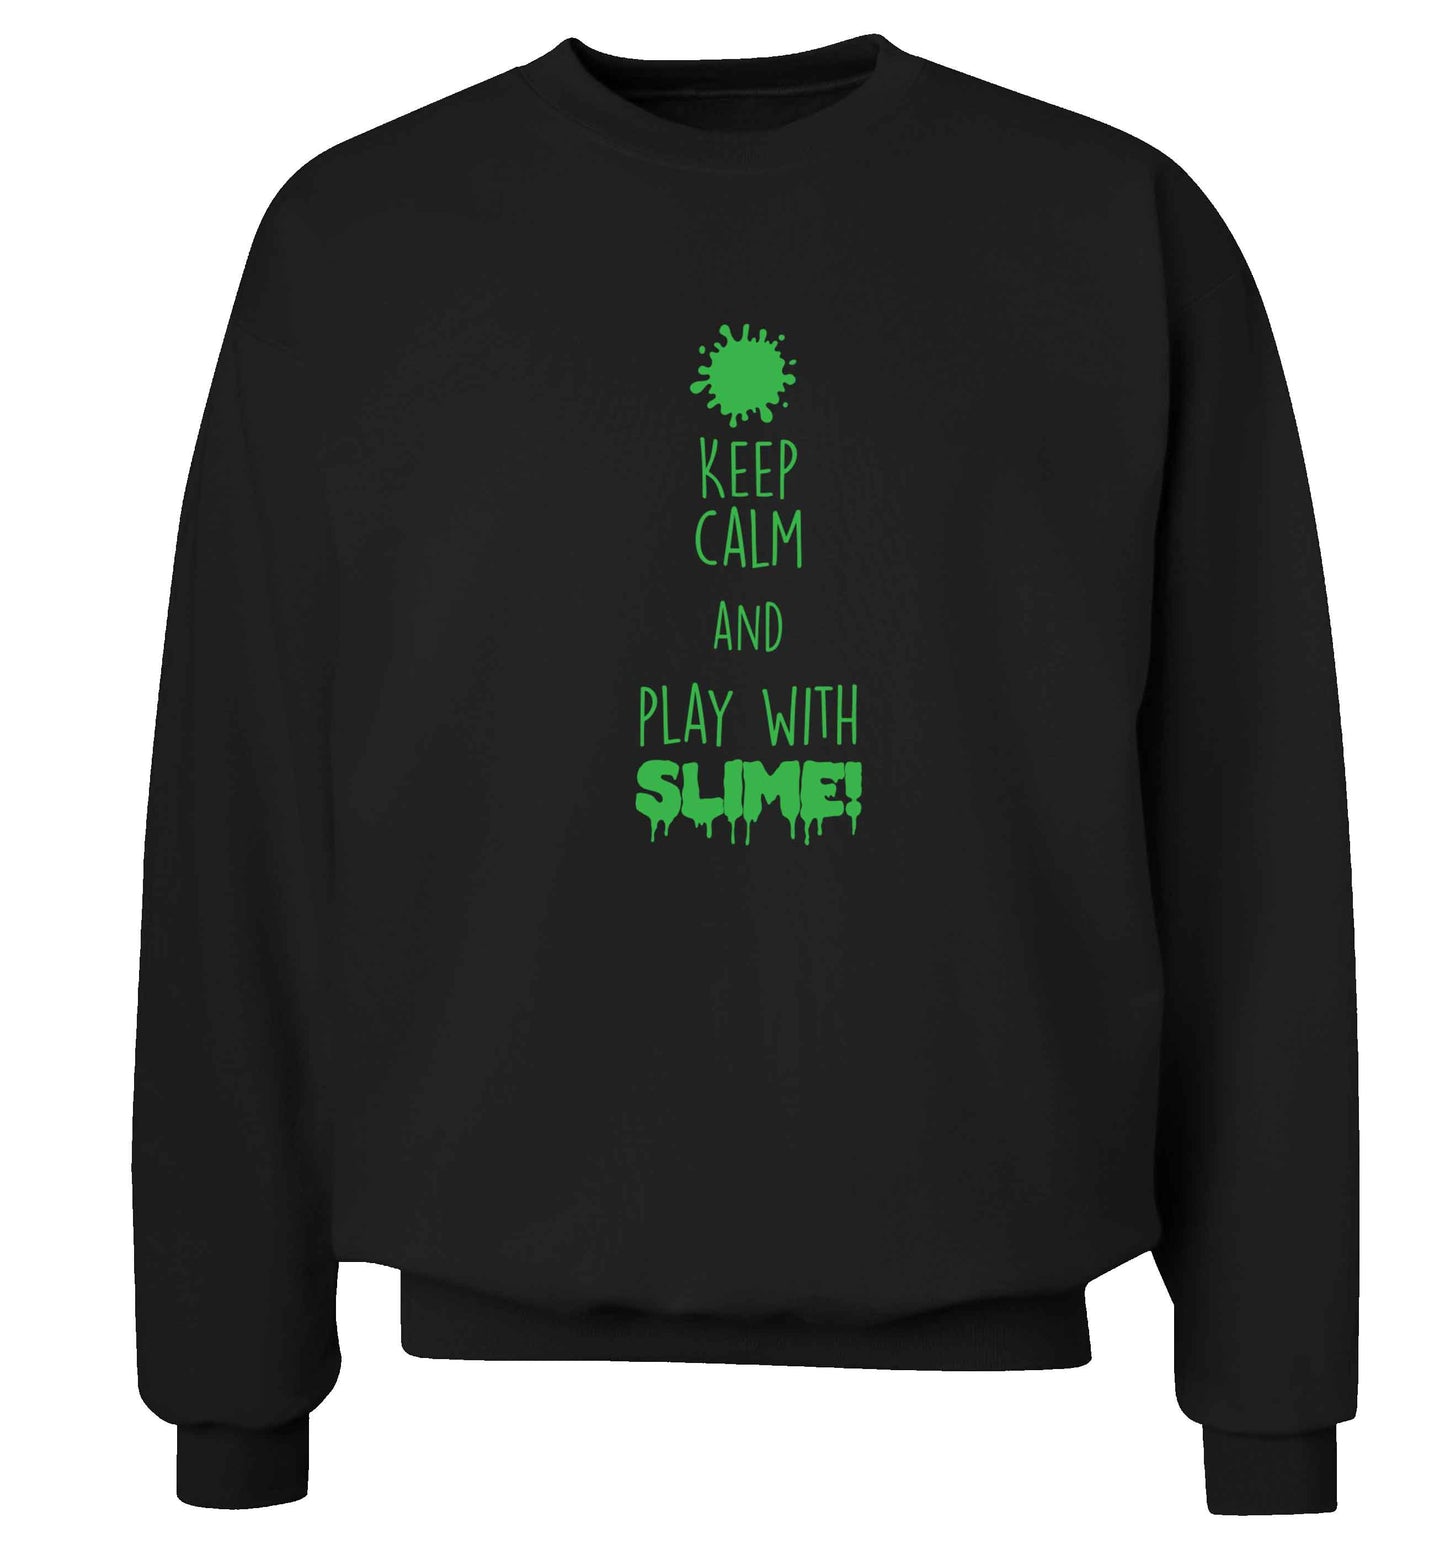 Neon green keep calm and play with slime!adult's unisex black sweater 2XL